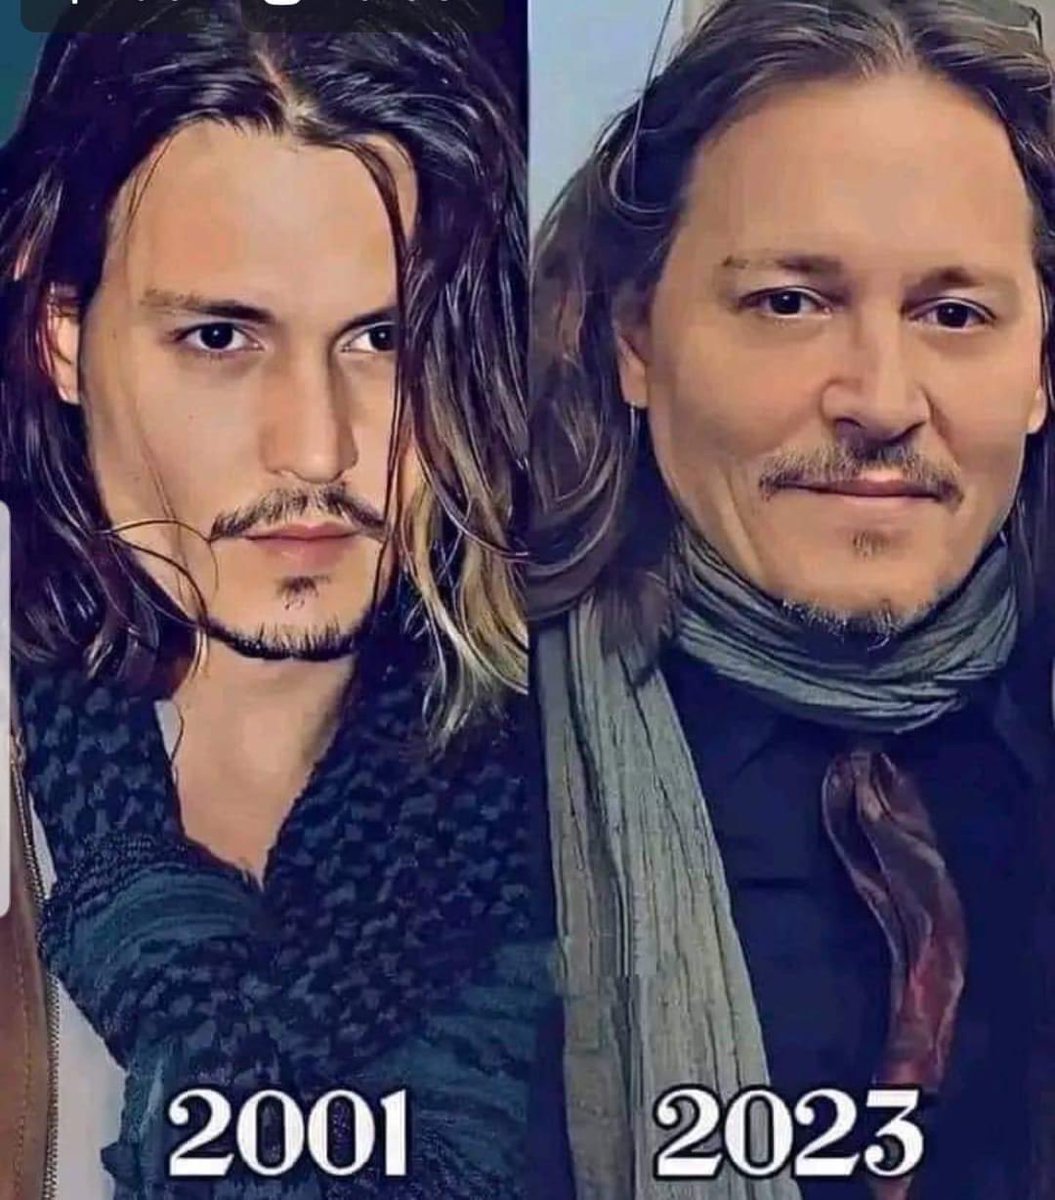 I think Johnny has found the fountain of youth 🥰🫠⛲️  #JohnnyDepp 
#JohnnyDeppIsALegend 
#JohnnyDeppIsLoved 
#FountainOfYouth